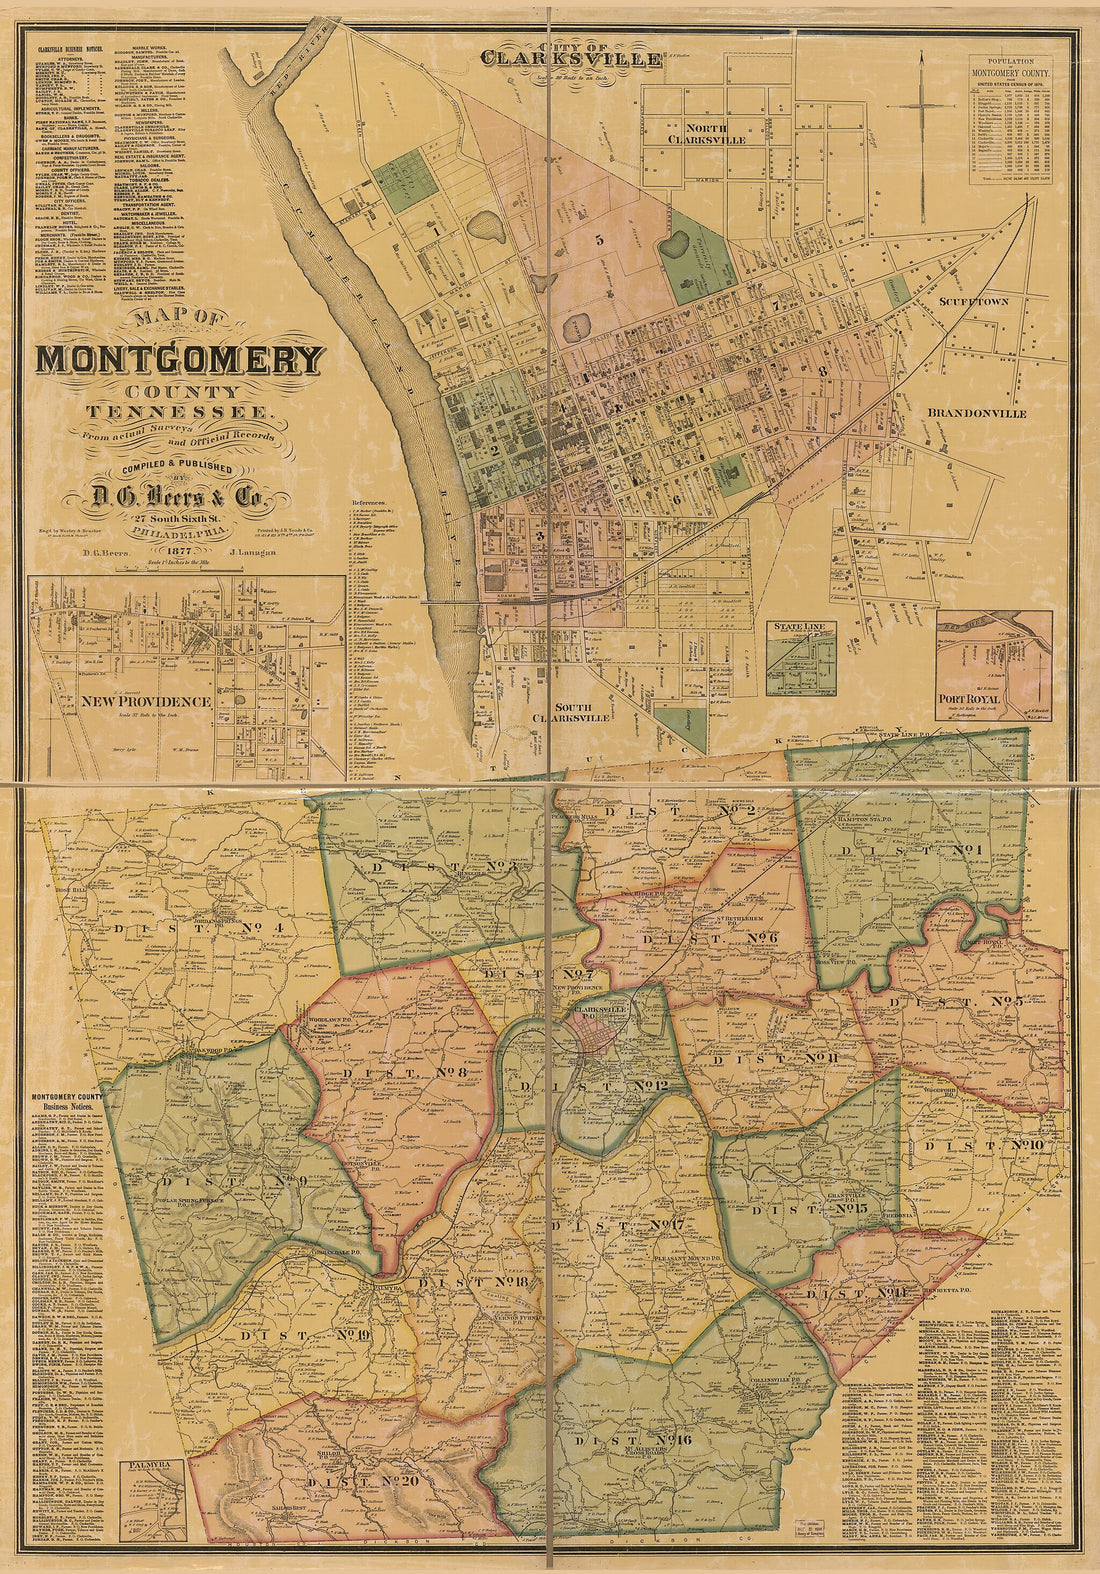 This old map of Map of Montgomery County, Tennessee : from Actual Surveys and Official Records from 1877 was created by D. G. (Daniel G.) Beers,  D.G. Beers &amp; Co, J. Lanagan,  Worley &amp; Bracher in 1877